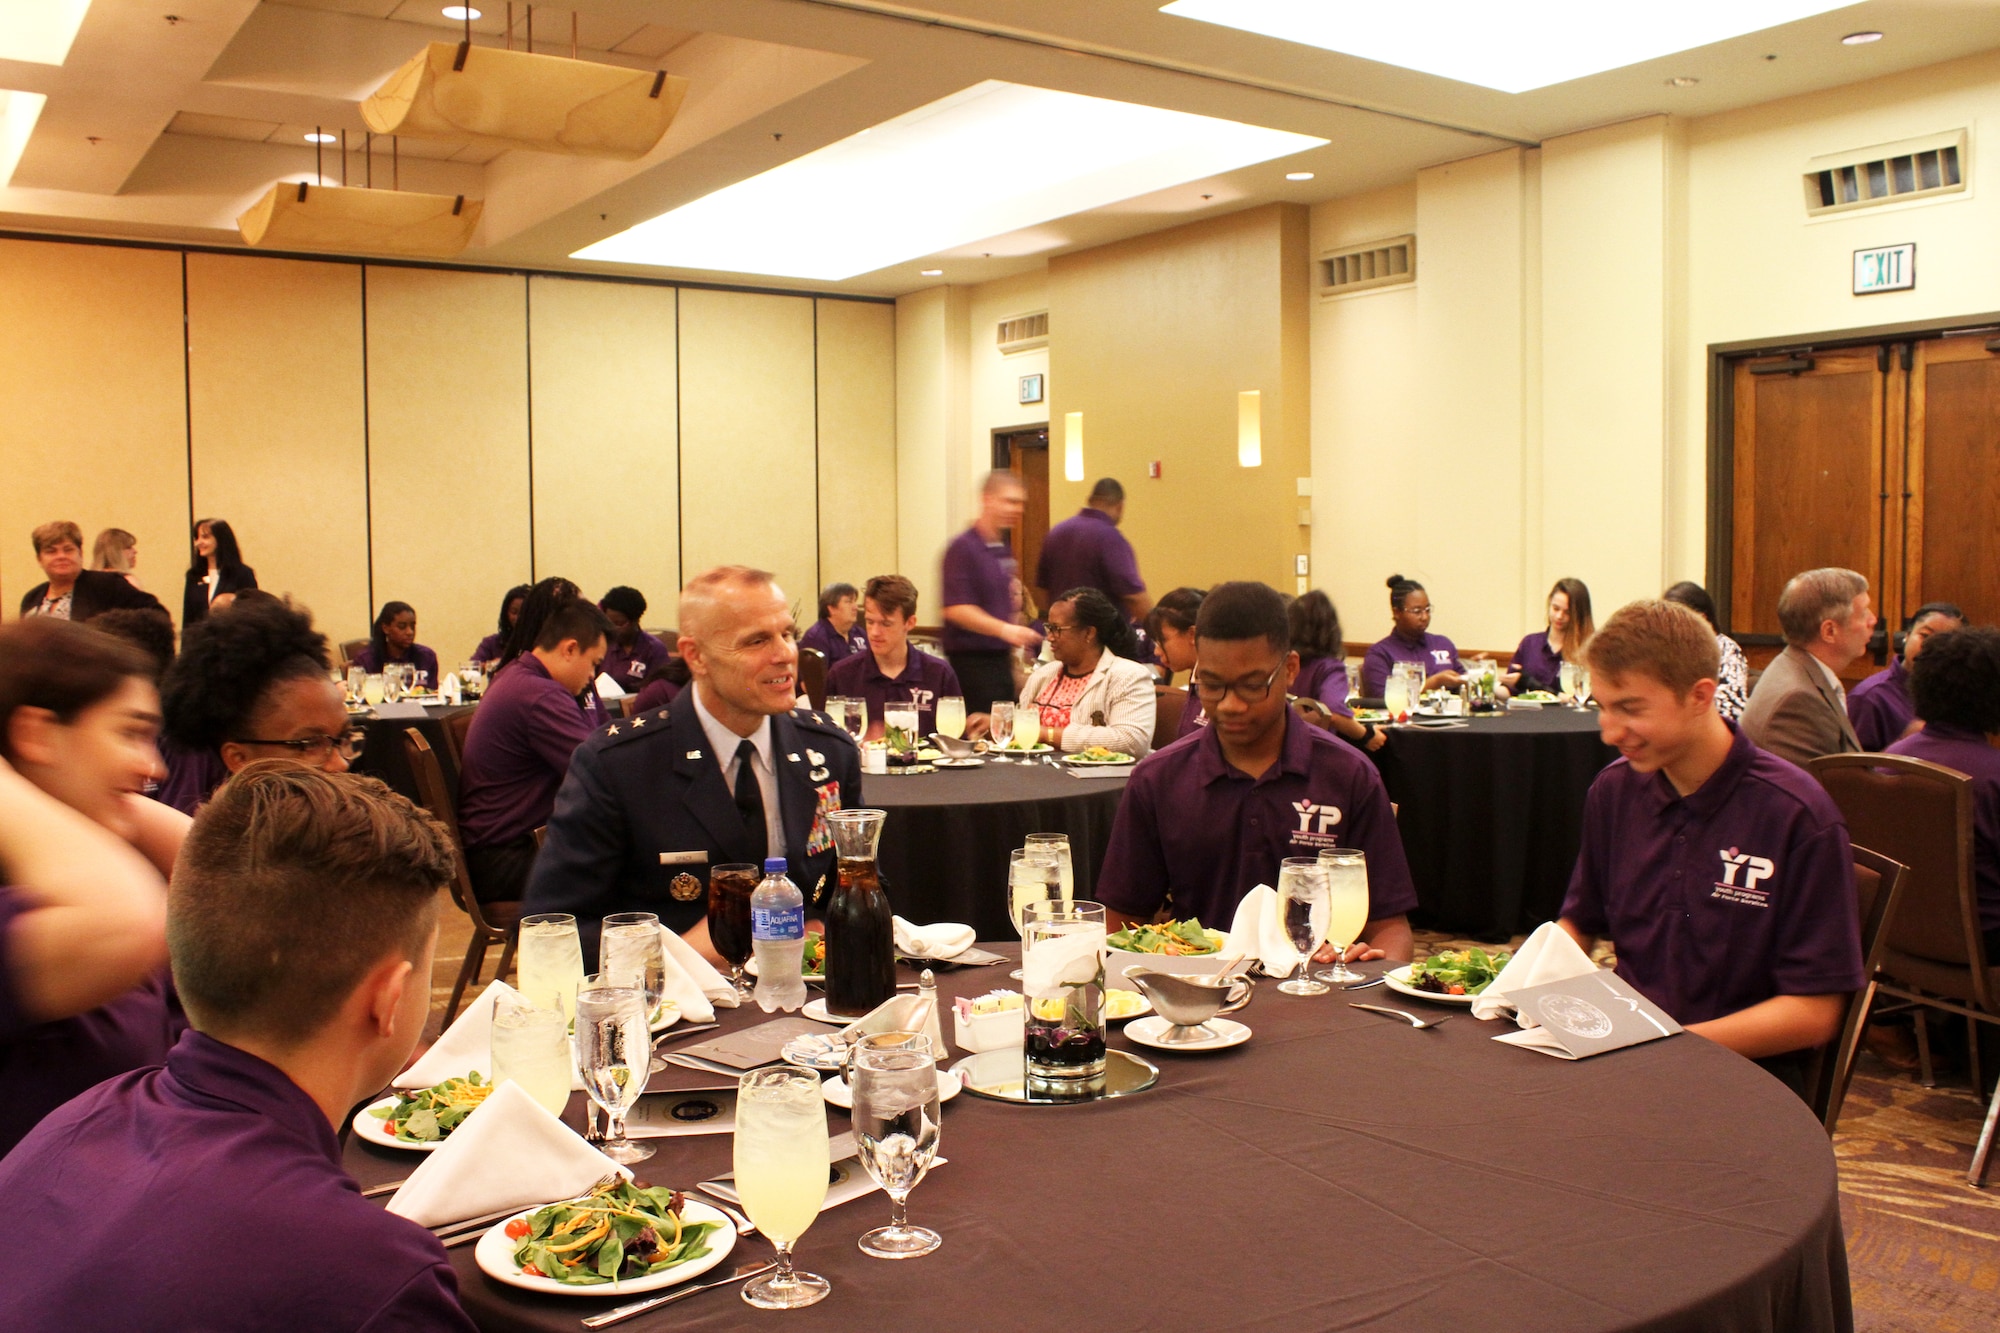 At center, Maj. Gen. Brad Spacy, Air Force Installtion and Mission Support Center commander, talks with attendees at the 2019 Military Youth of the Year Summit awards luncheon in San Antonio June 20, 2019. Spacy was guest speaker and awards presenter for the event. (U.S. Air Force photo by Debbie Aragon)